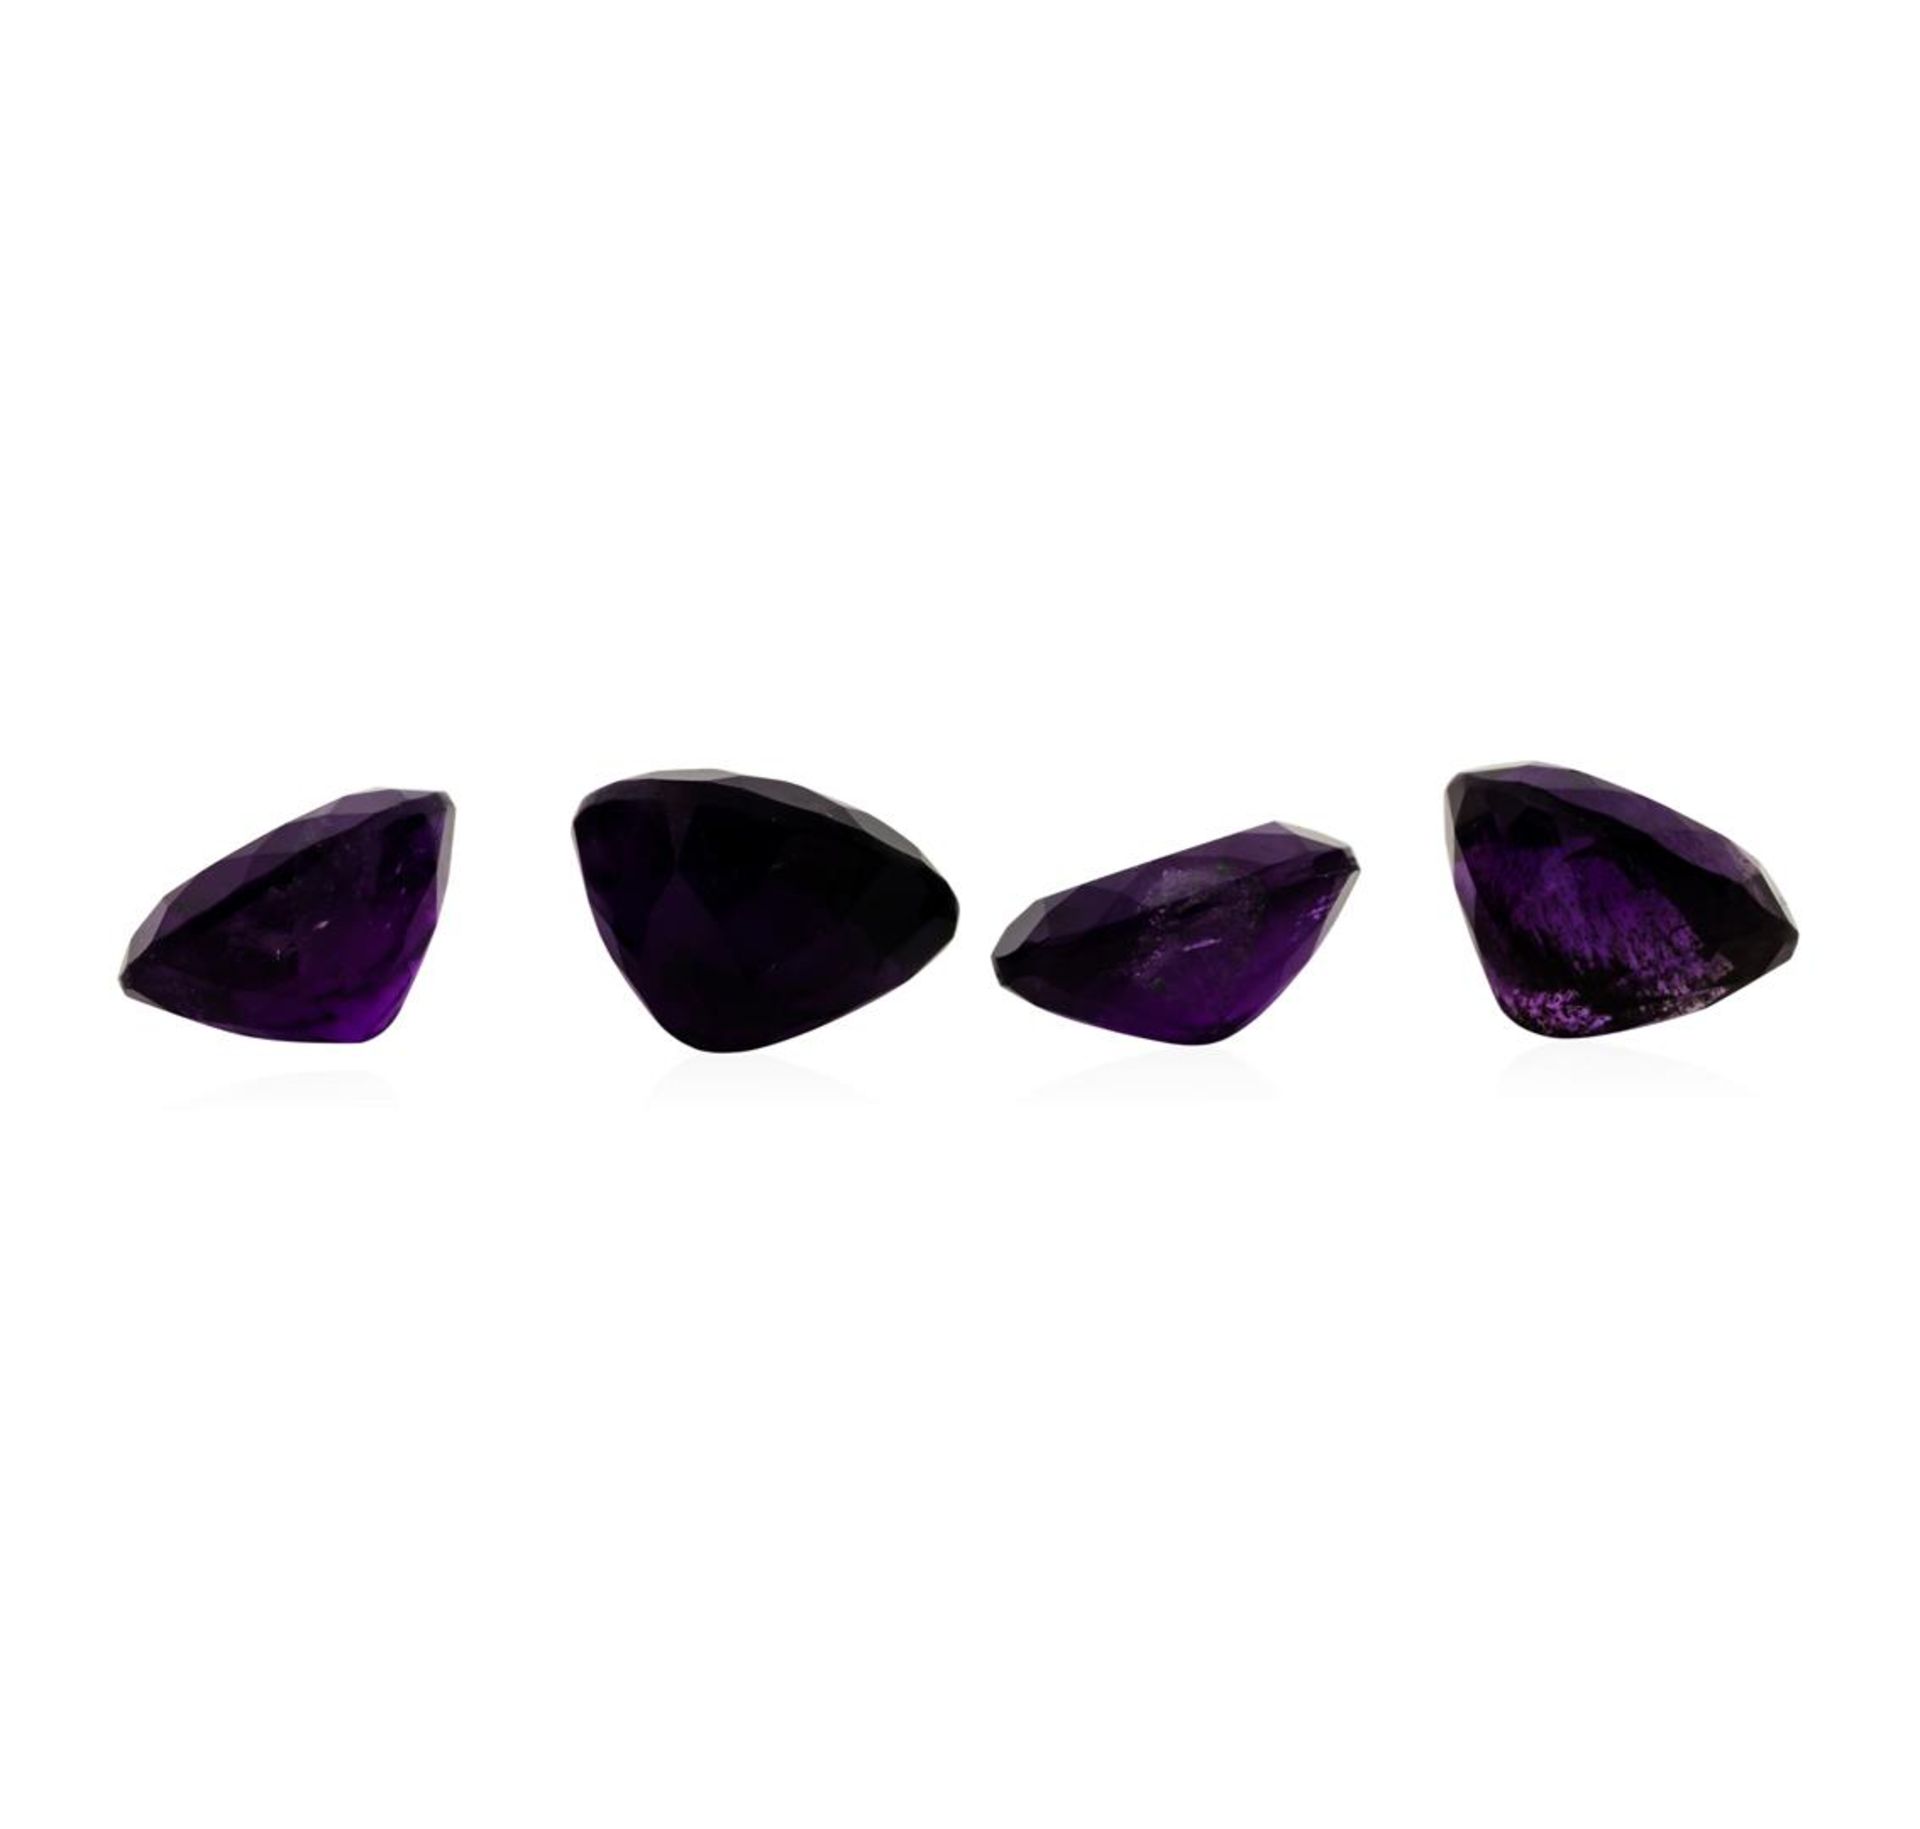 18.42 ctw.Natural Oval Cut Amethyst Parcel of Four - Image 2 of 3